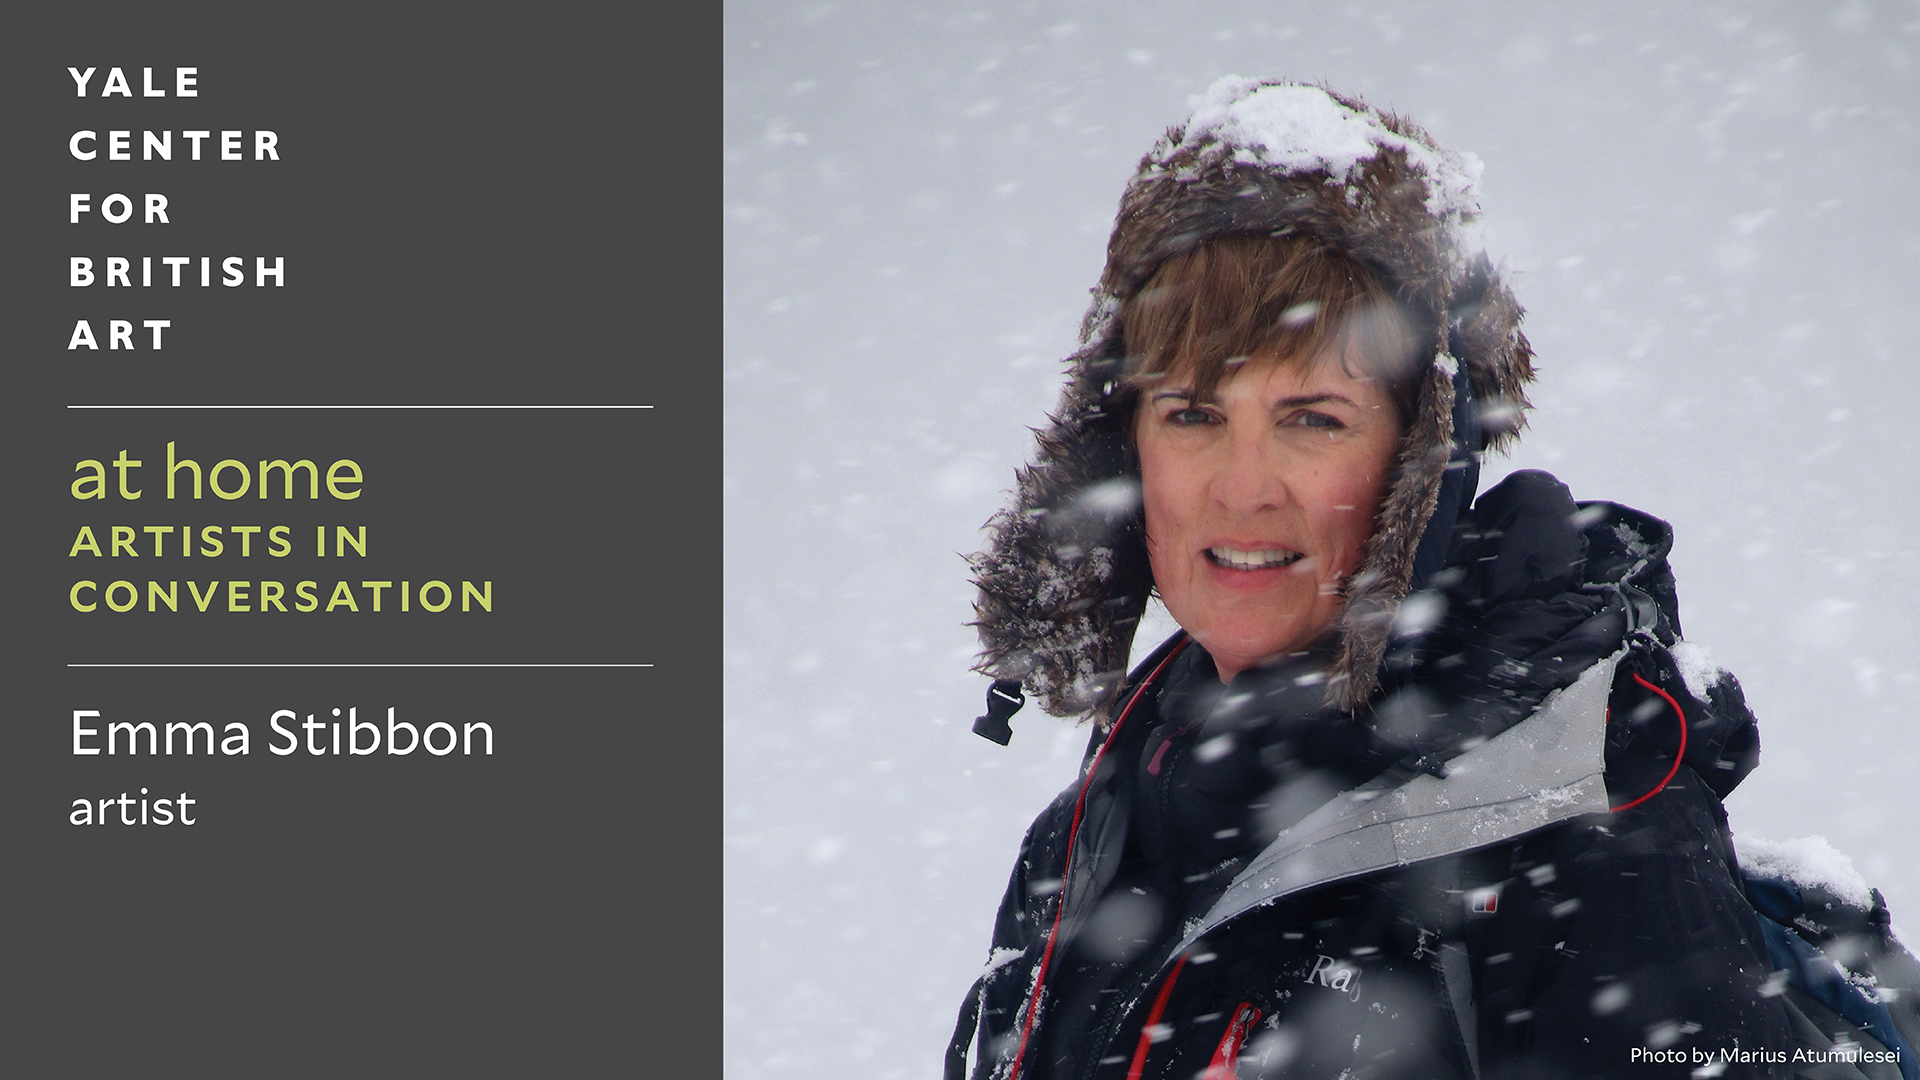 A title slide with a portrait of Emma Stibbon, a white woman in a snowy environment and warm winter attire.